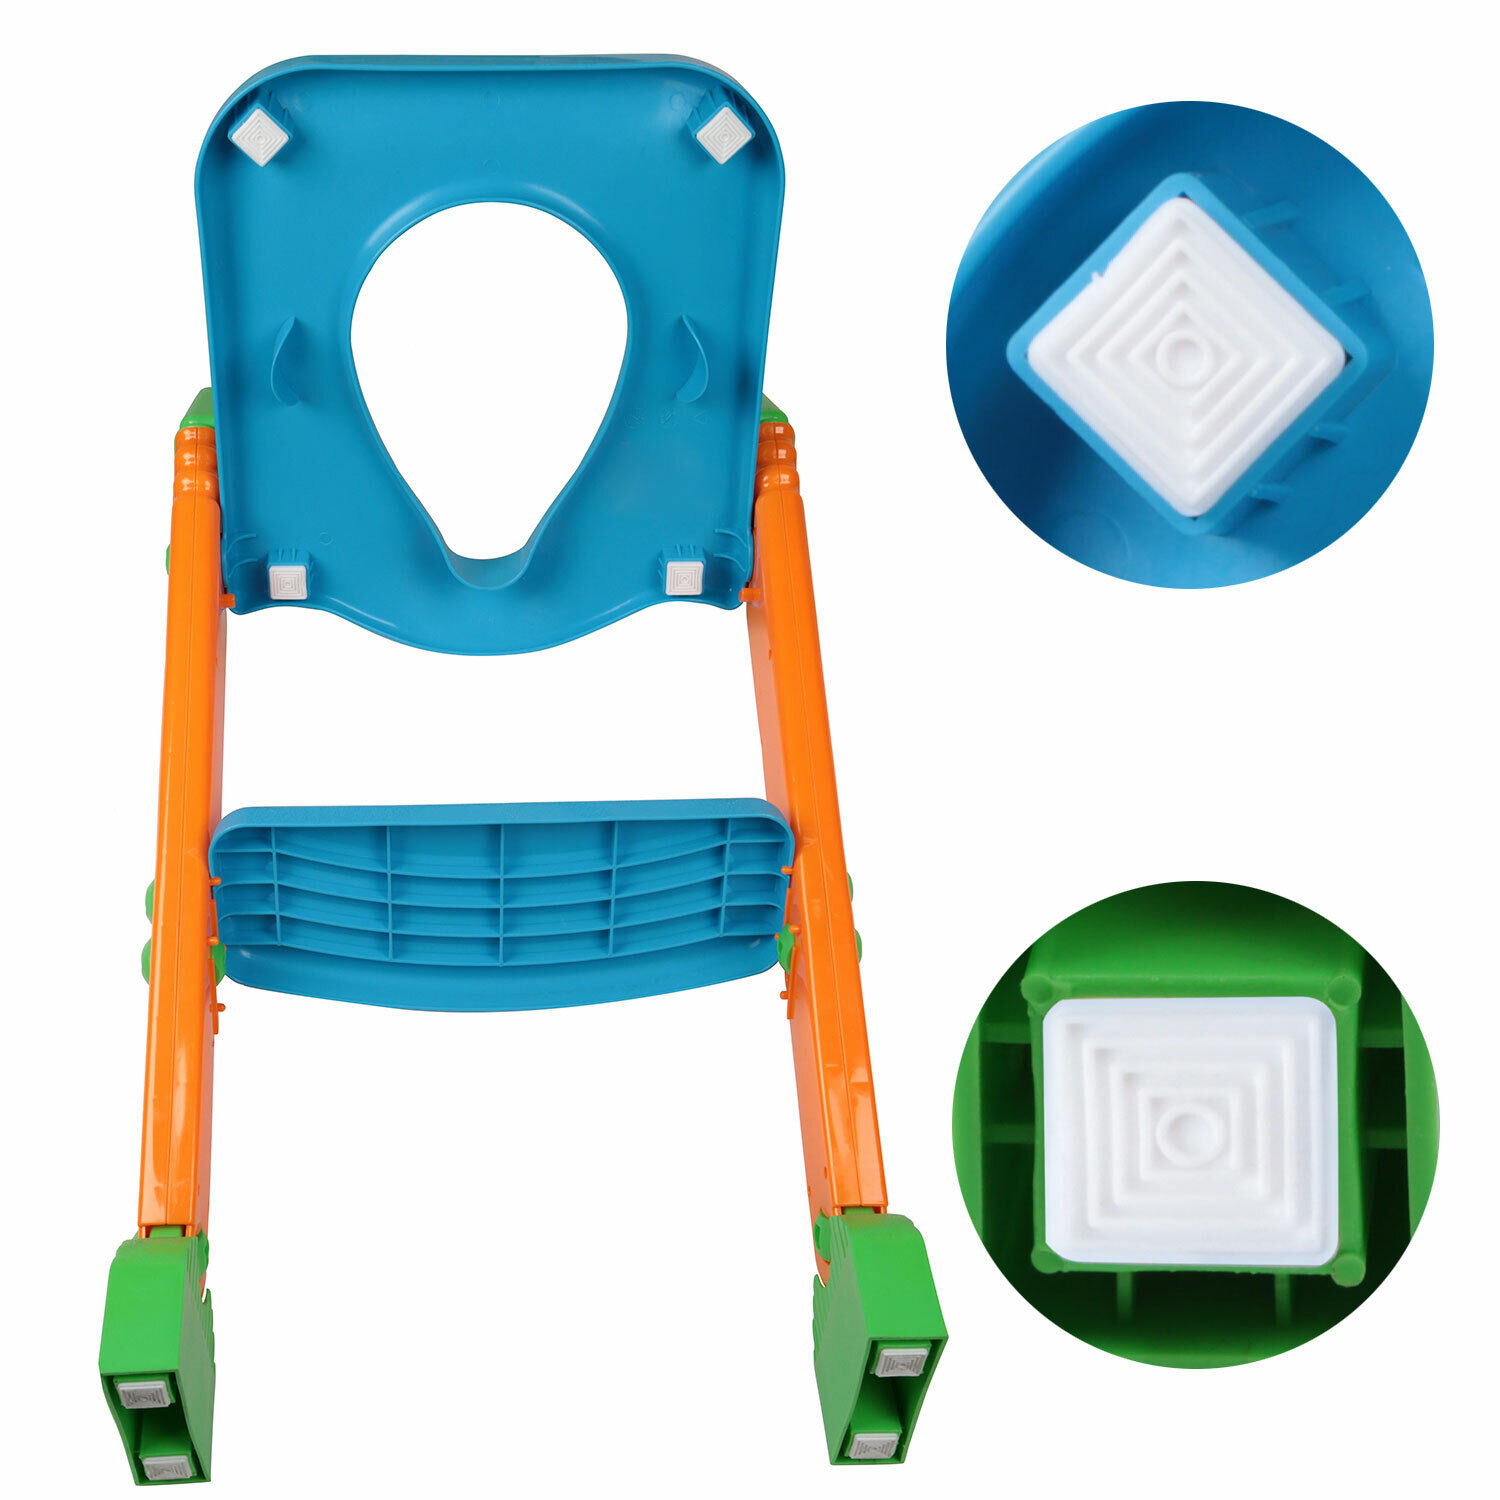 Potty Training Toilet Seat with Step Stool Ladder for Baby Toddler Kid +Handles iMounTEK GPCT850 - фотография #12